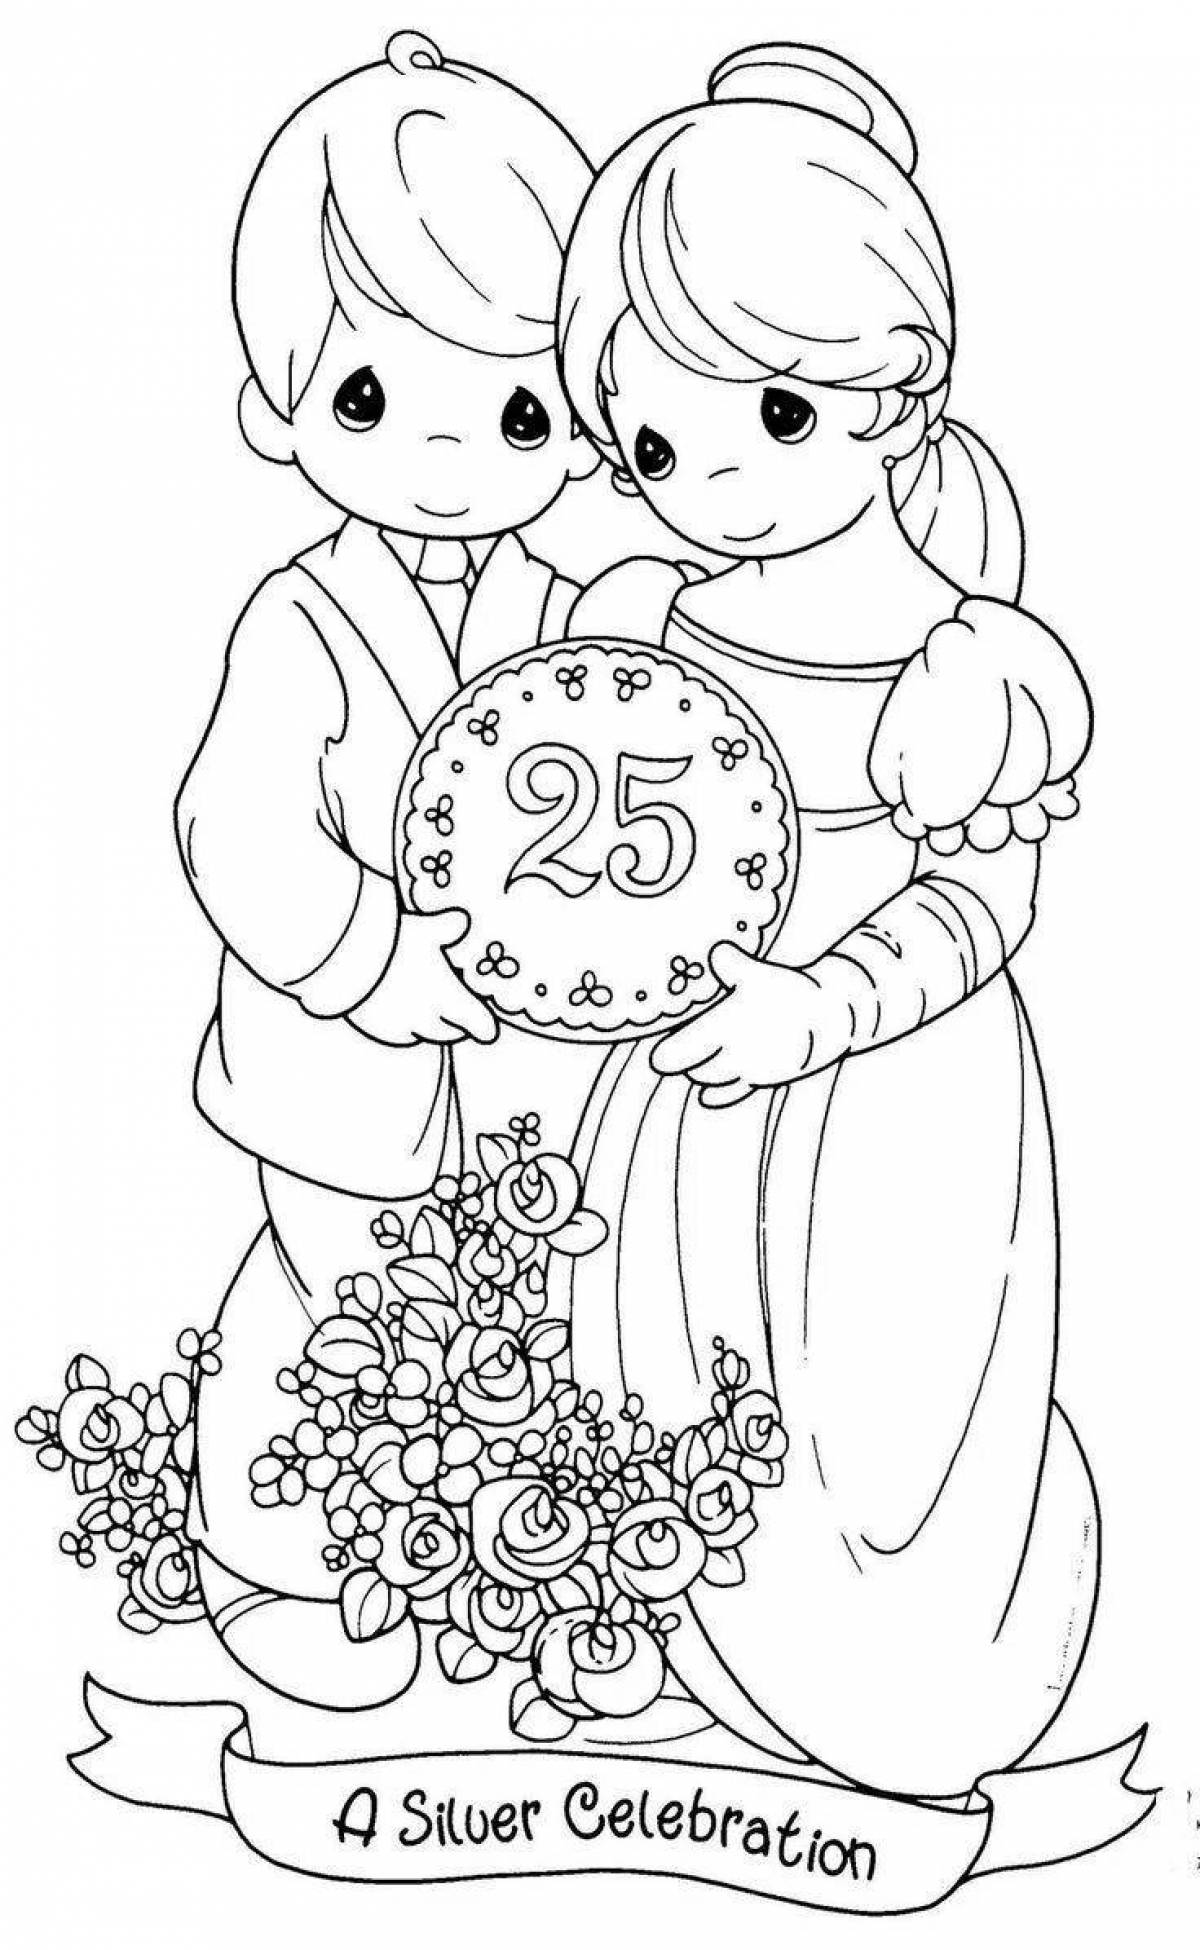 Glowing wedding coloring book for kids